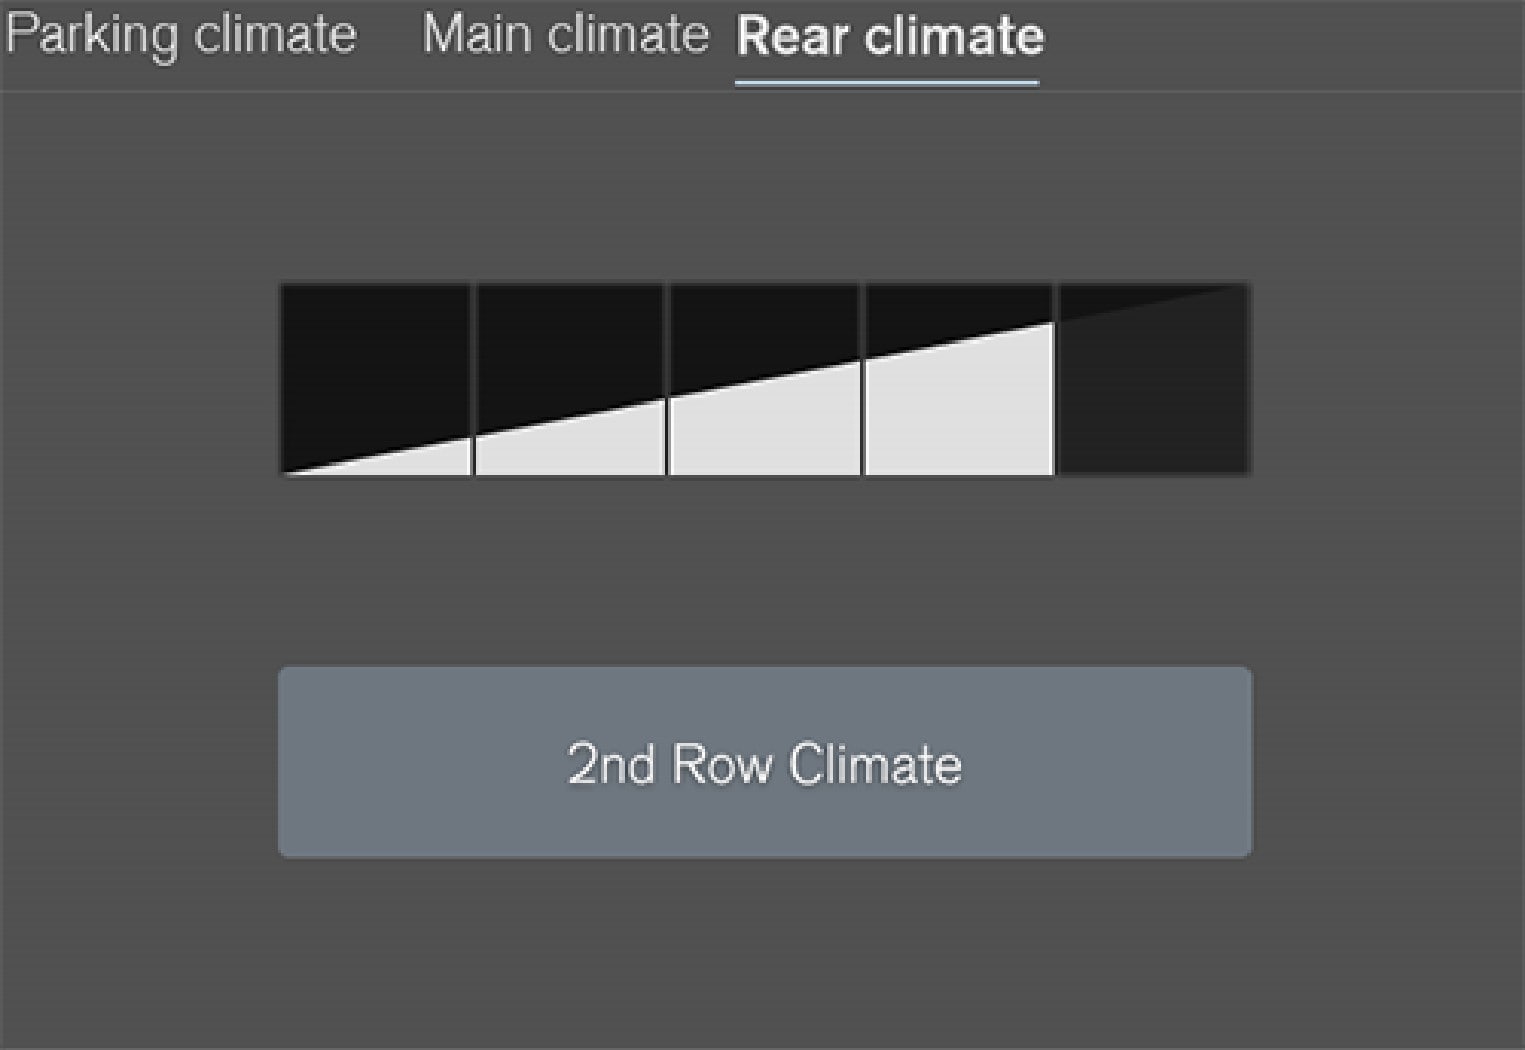 The fan control buttons in the tab Rear climate in the climate view.